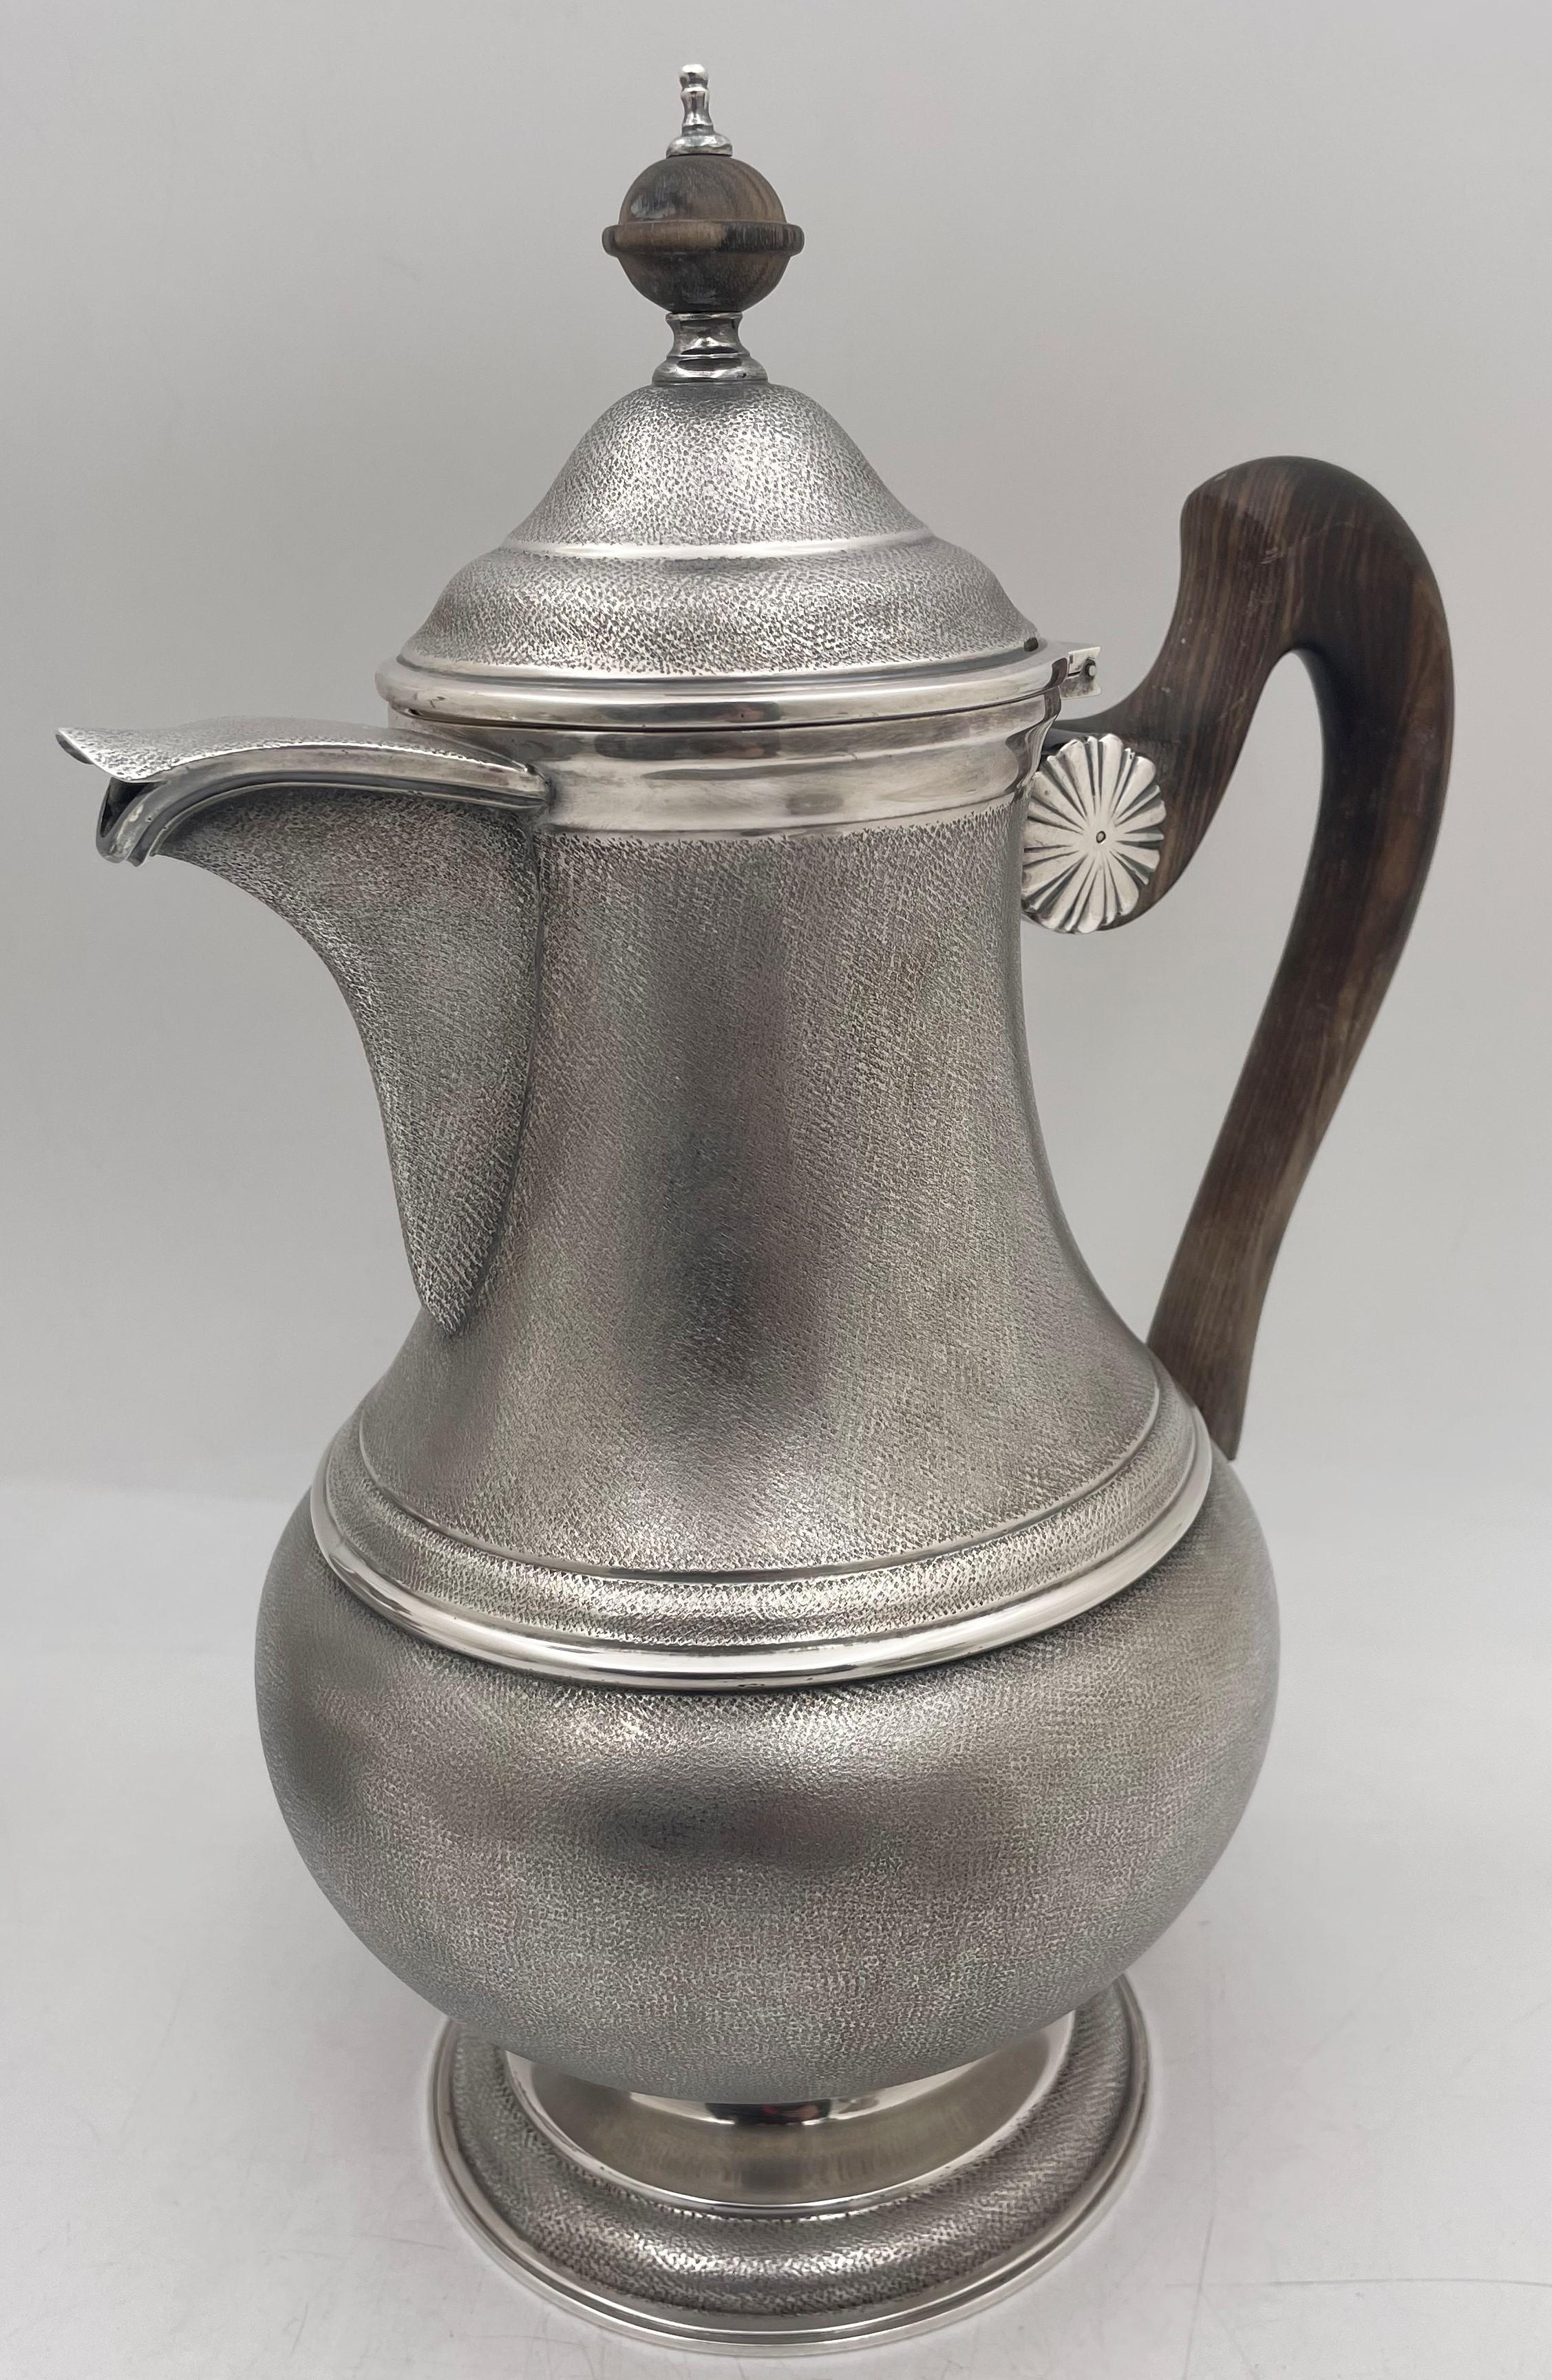 Mario Buccellati sterling silver tea and coffee set, made in a rare Buccellati technique with satin finish, with wood handles, in an elegant design, from the 20th century, consisting of:

- a coffee pot measuring 11'' in height by 8'' from handle to